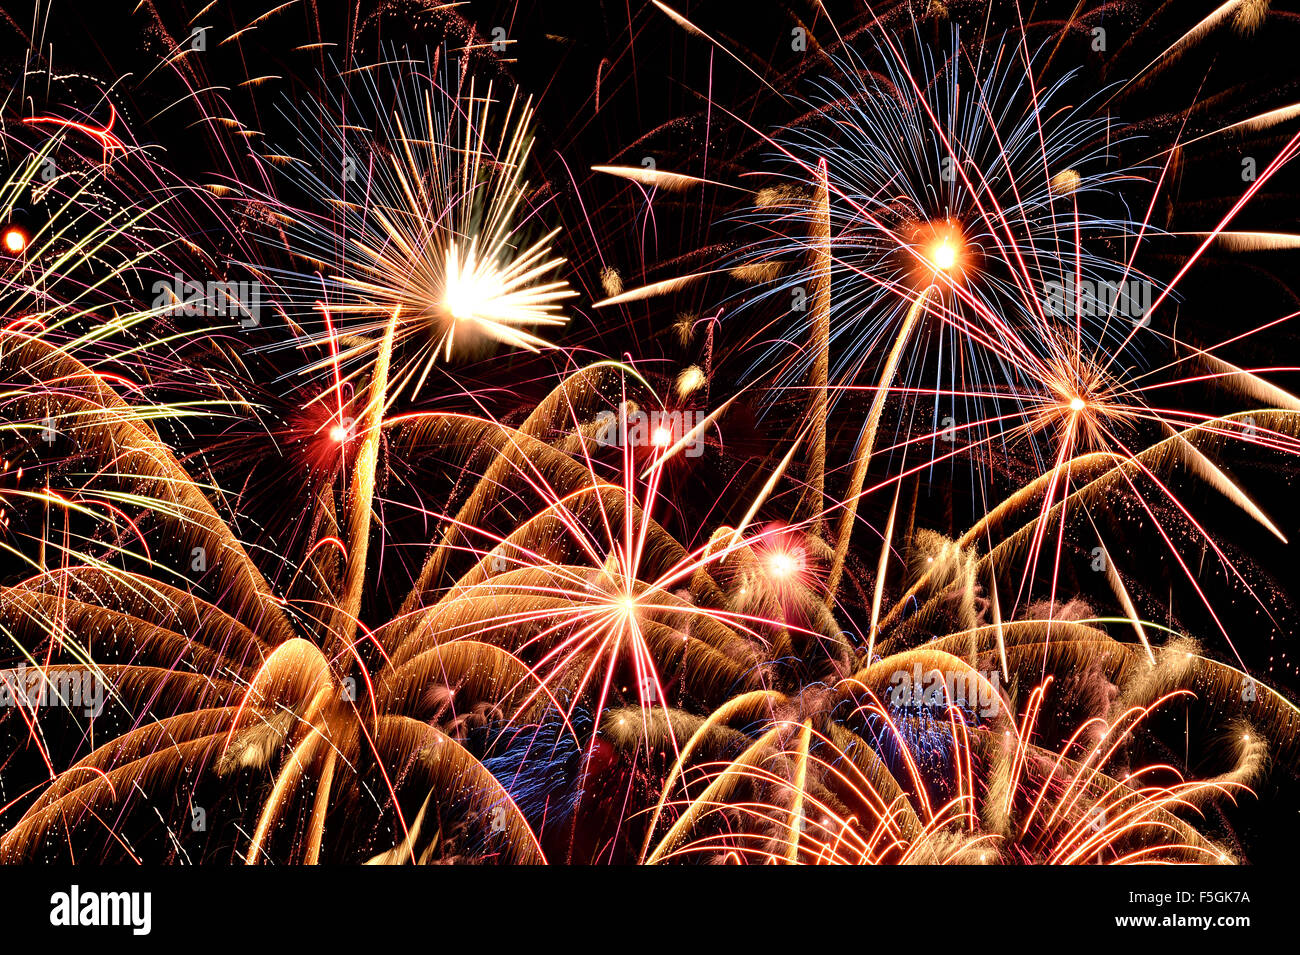 Close up view of fireworks against a dark sky Stock Photo